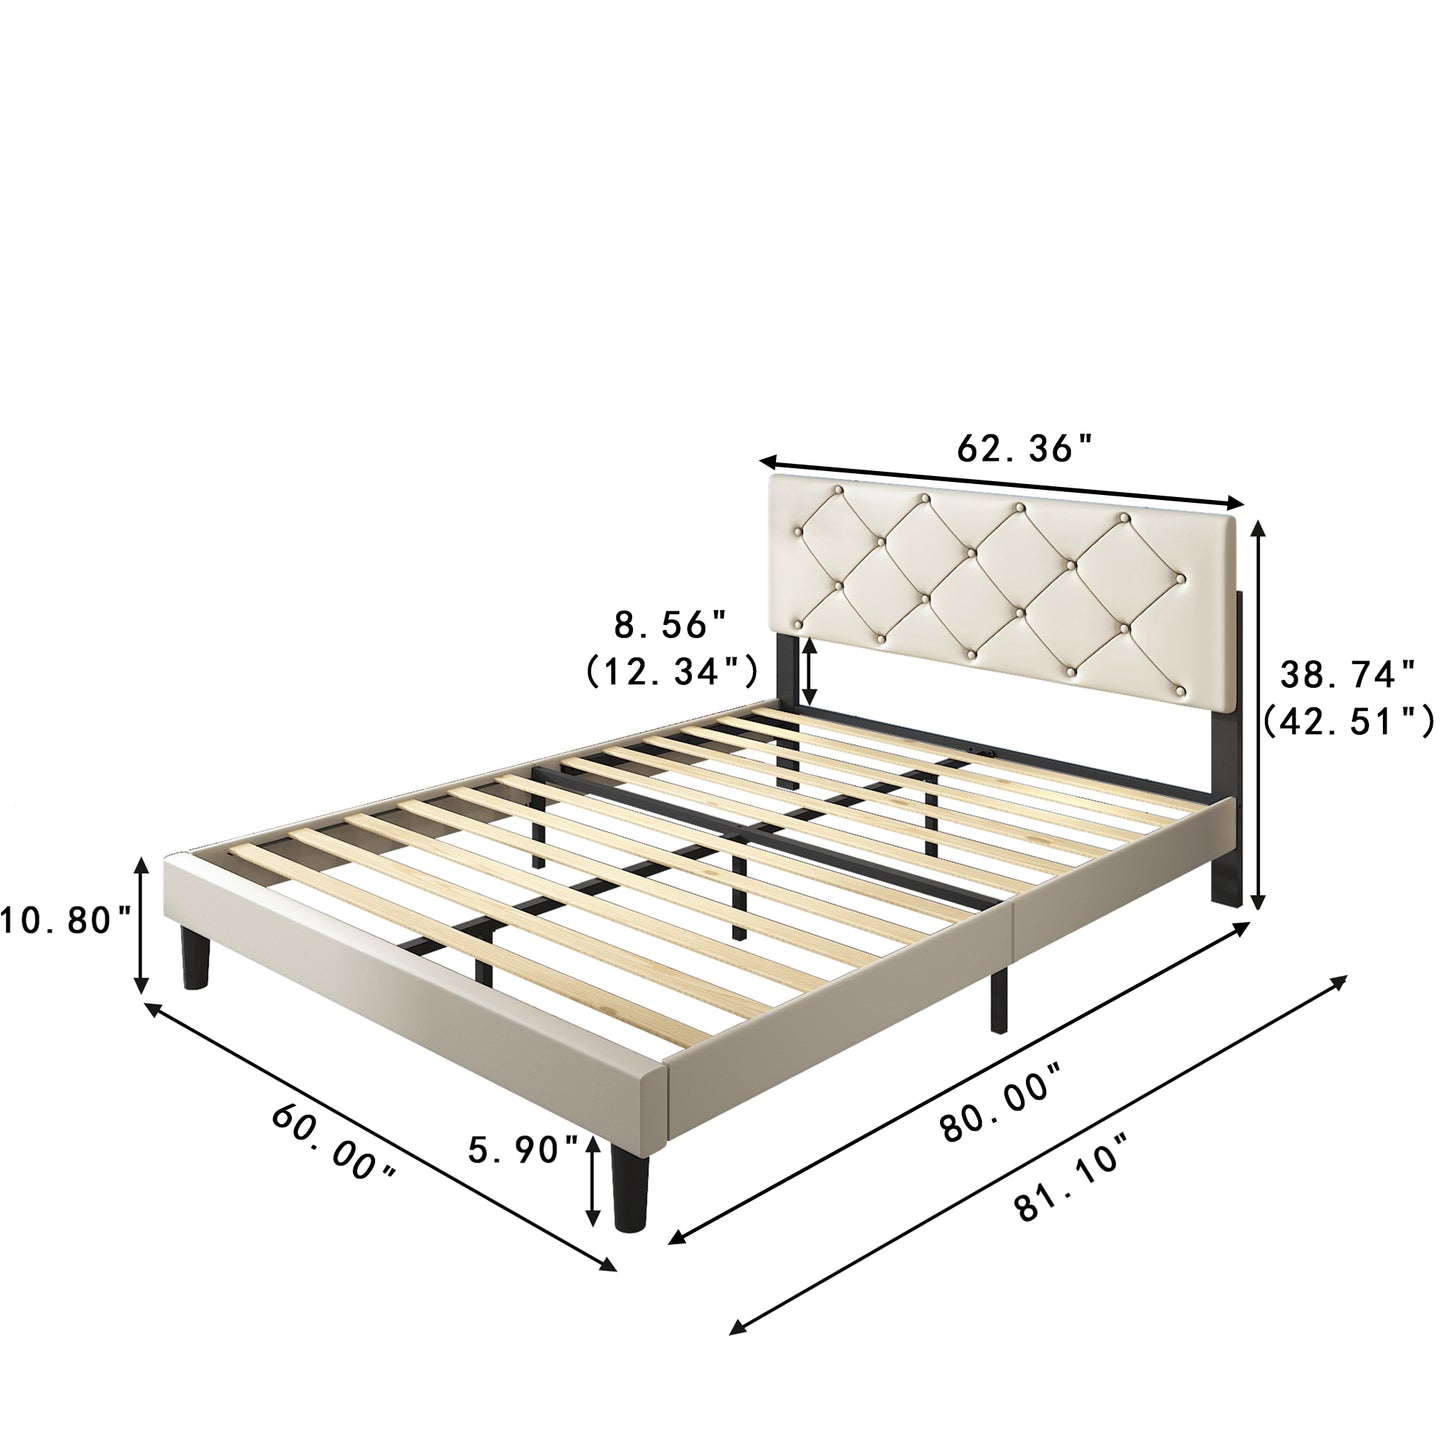 White Fabric Upholstered Platform Bed Frame Queen Size with Height Adjustable Headboard, Mattress Foundation with Strong Wooden Slat Support, No Box Spring Needed